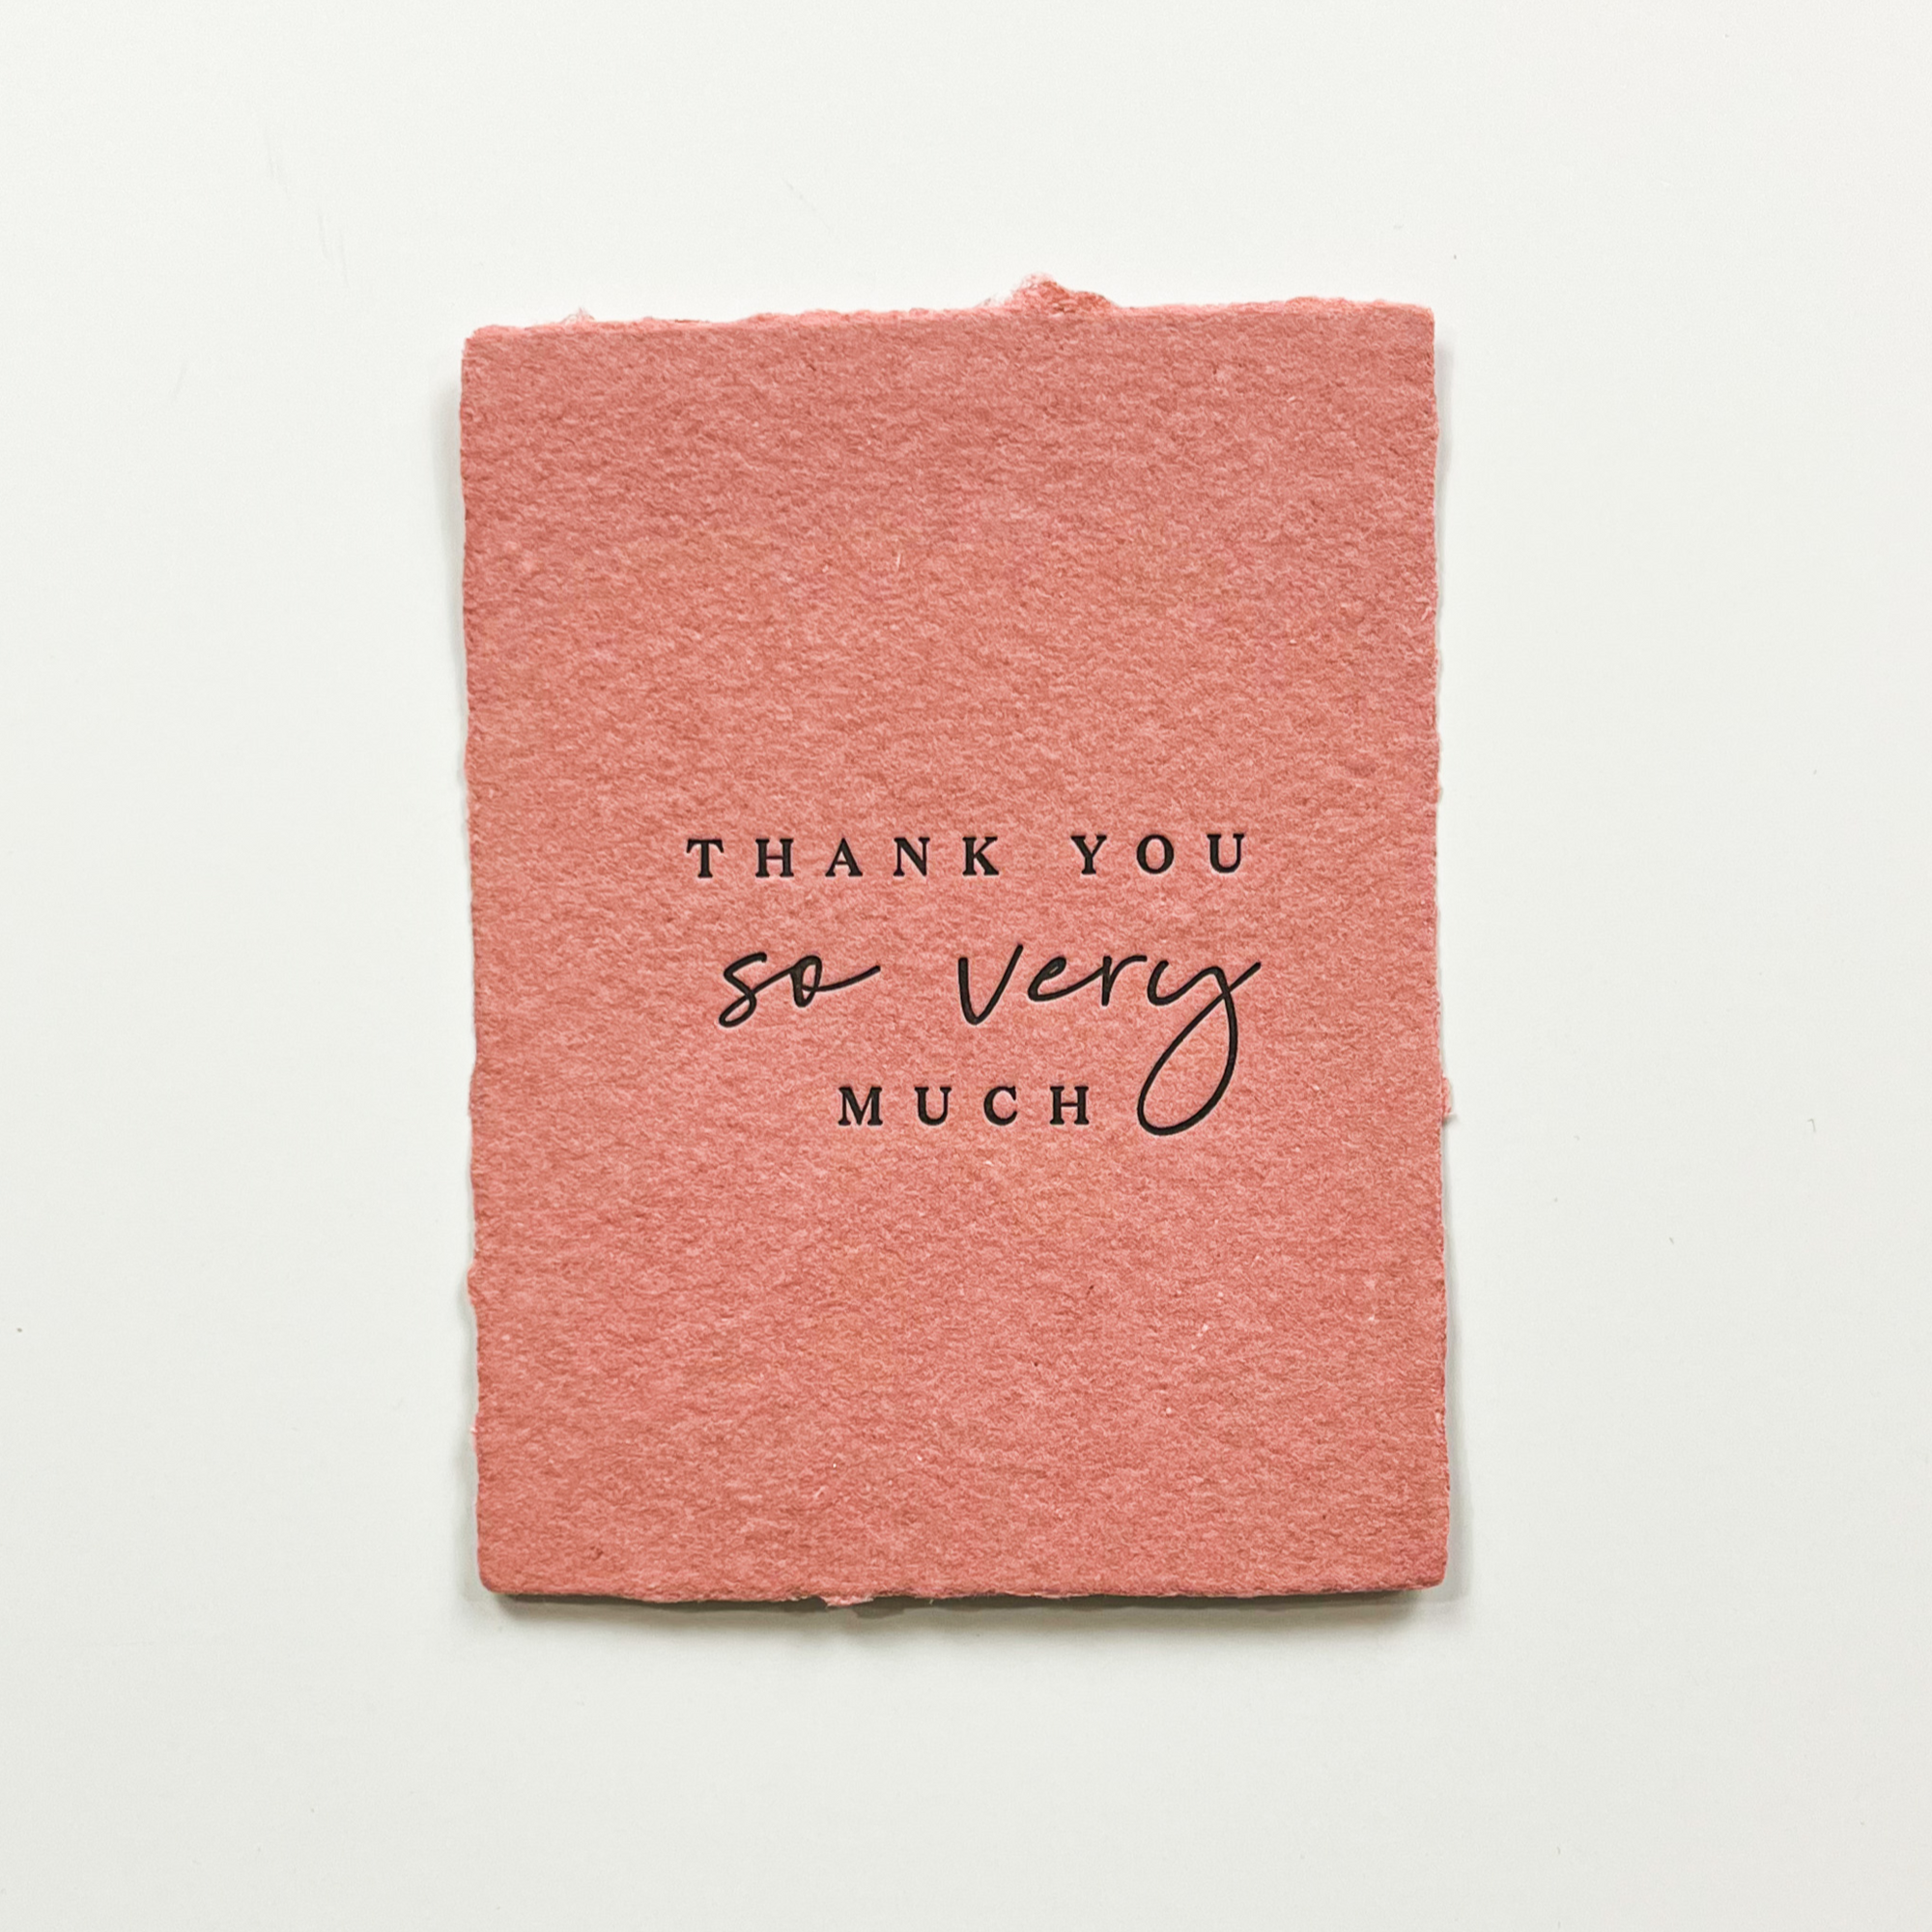 "Thank you so very much" Greeting Card